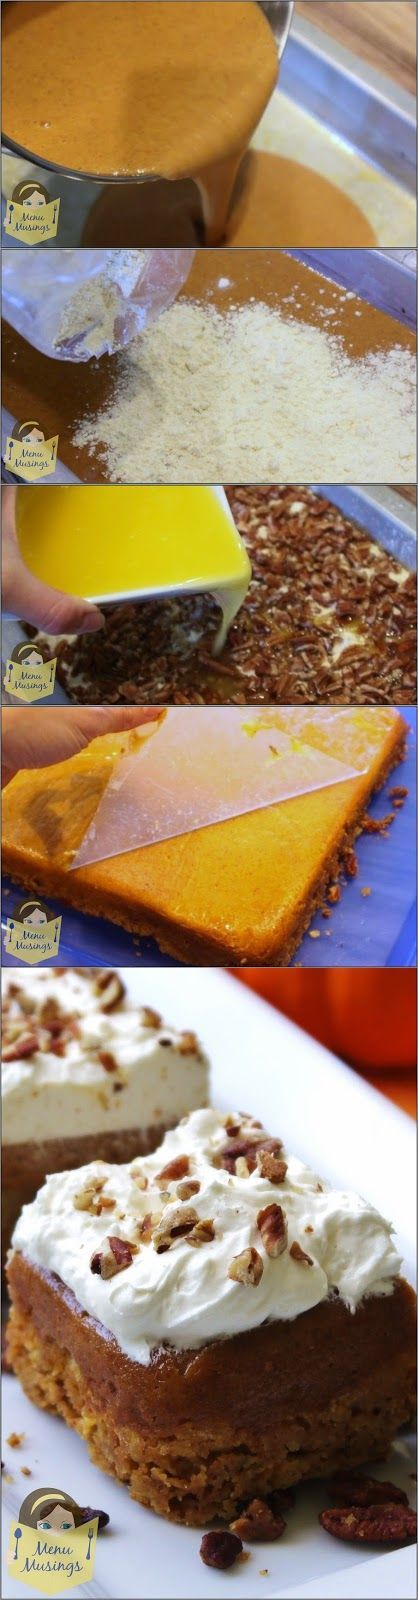 Pumpkin Upside Down Cake – One of our absolute favorite desserts from the time A